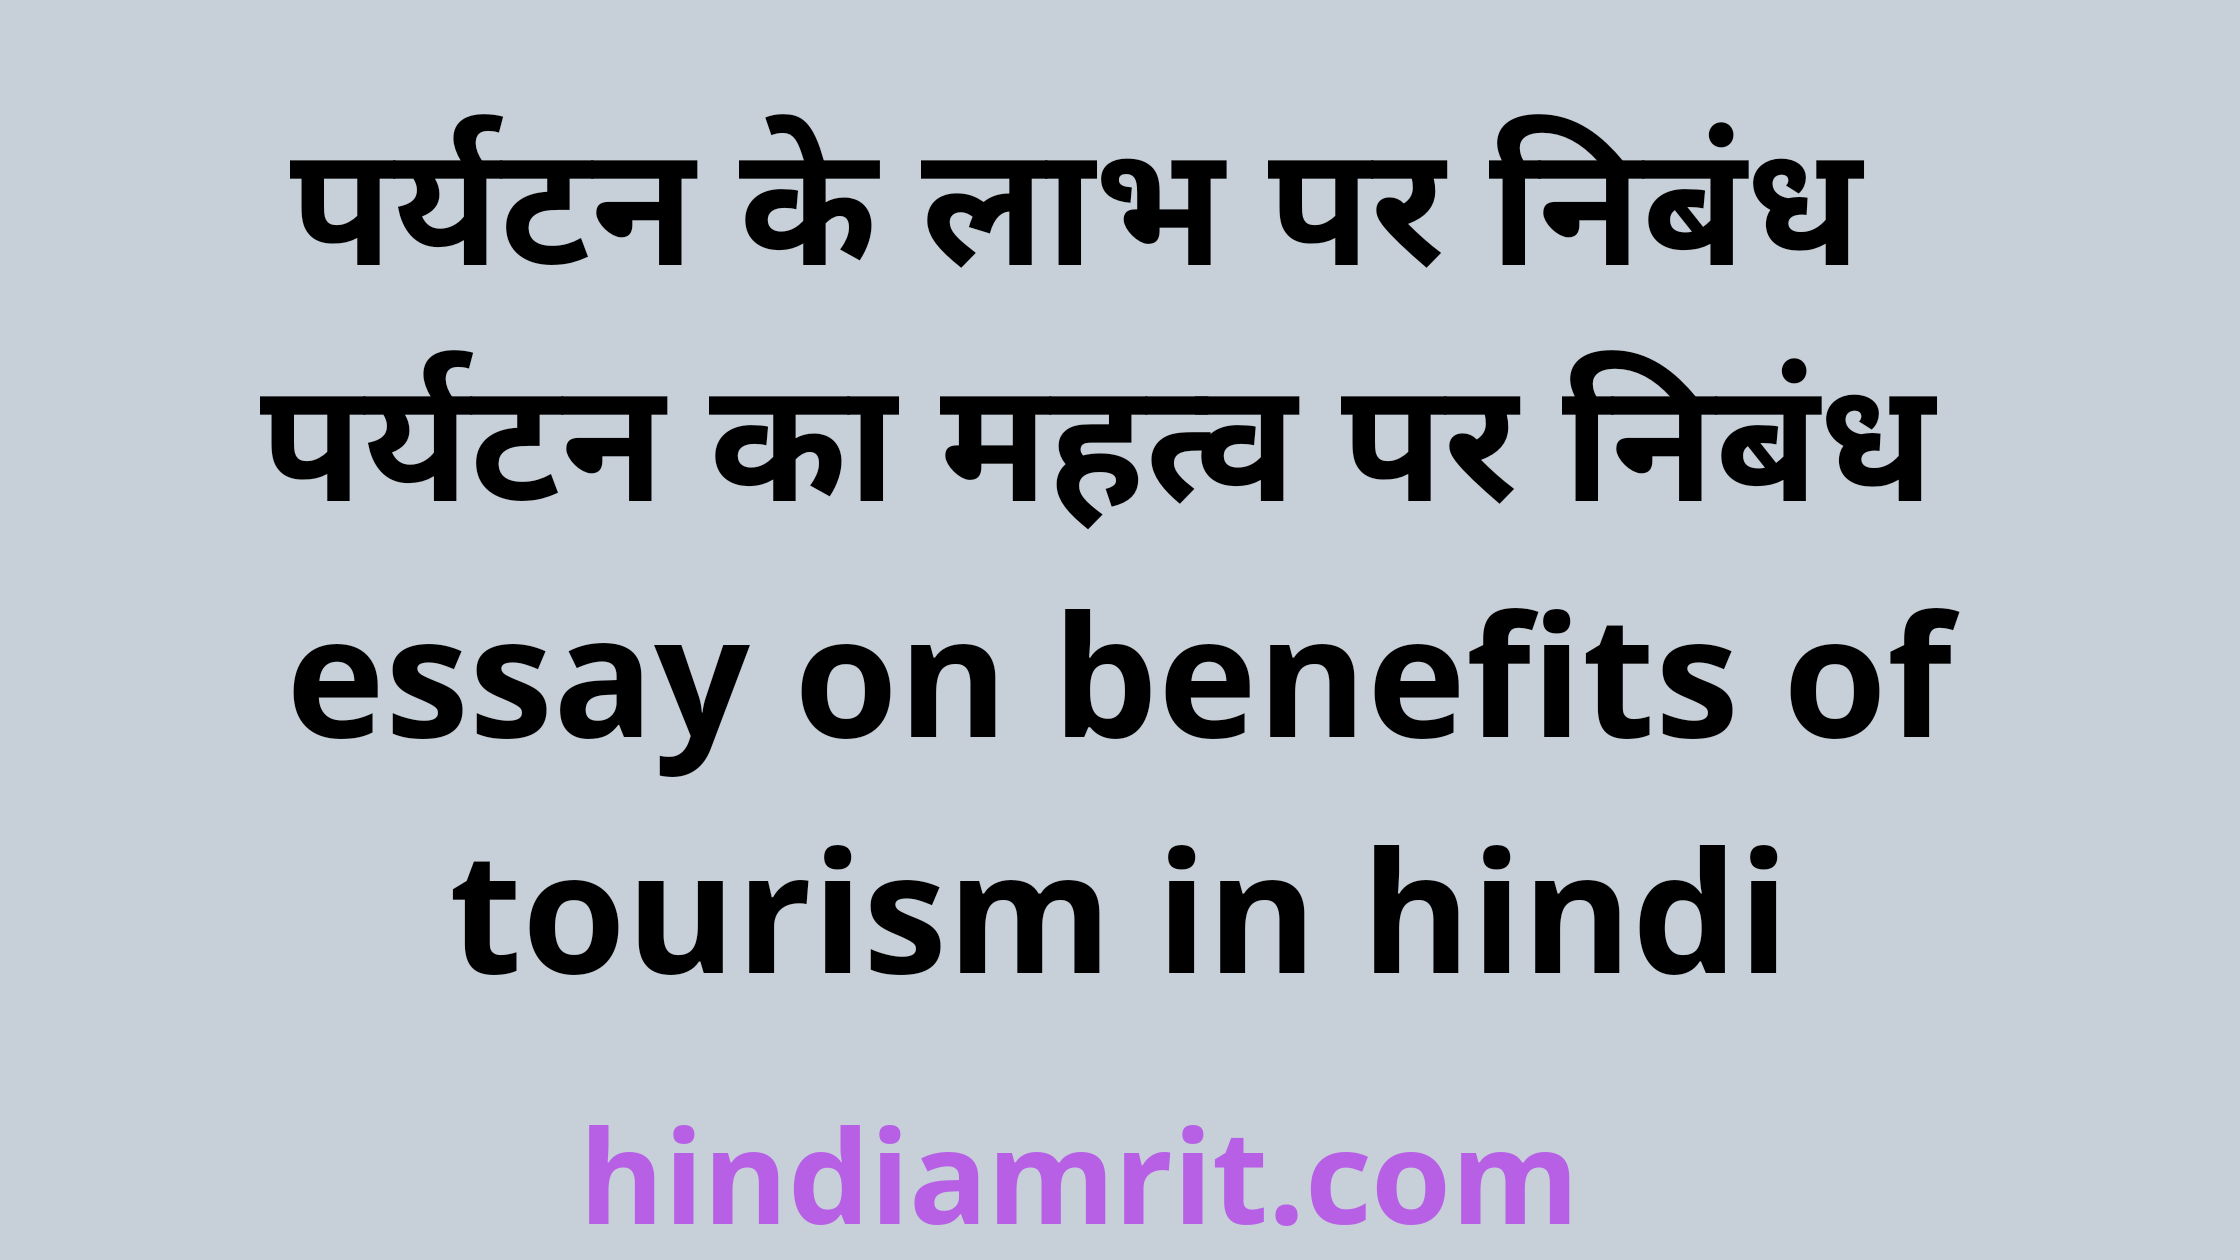 essay on tourism in india in hindi